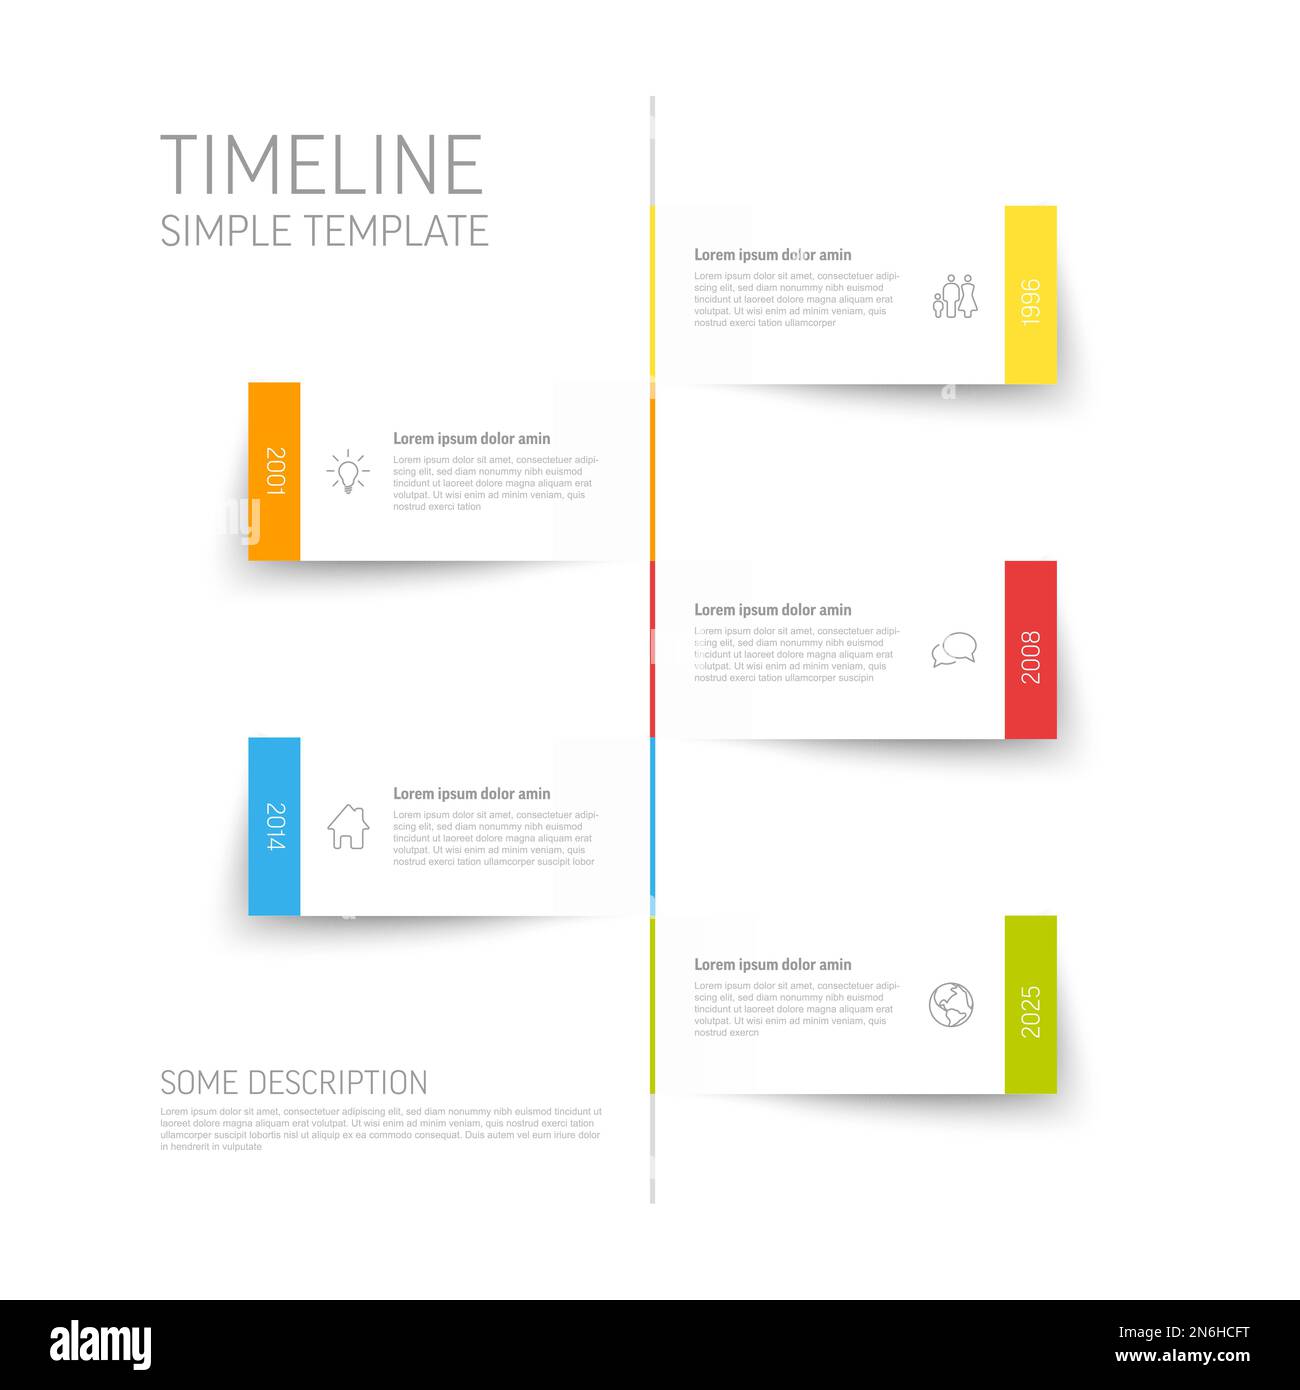 Vector simple infographic vertical time line template with rectangle placeholders. Business company timeline overview profile with icons and text bloc Stock Vector